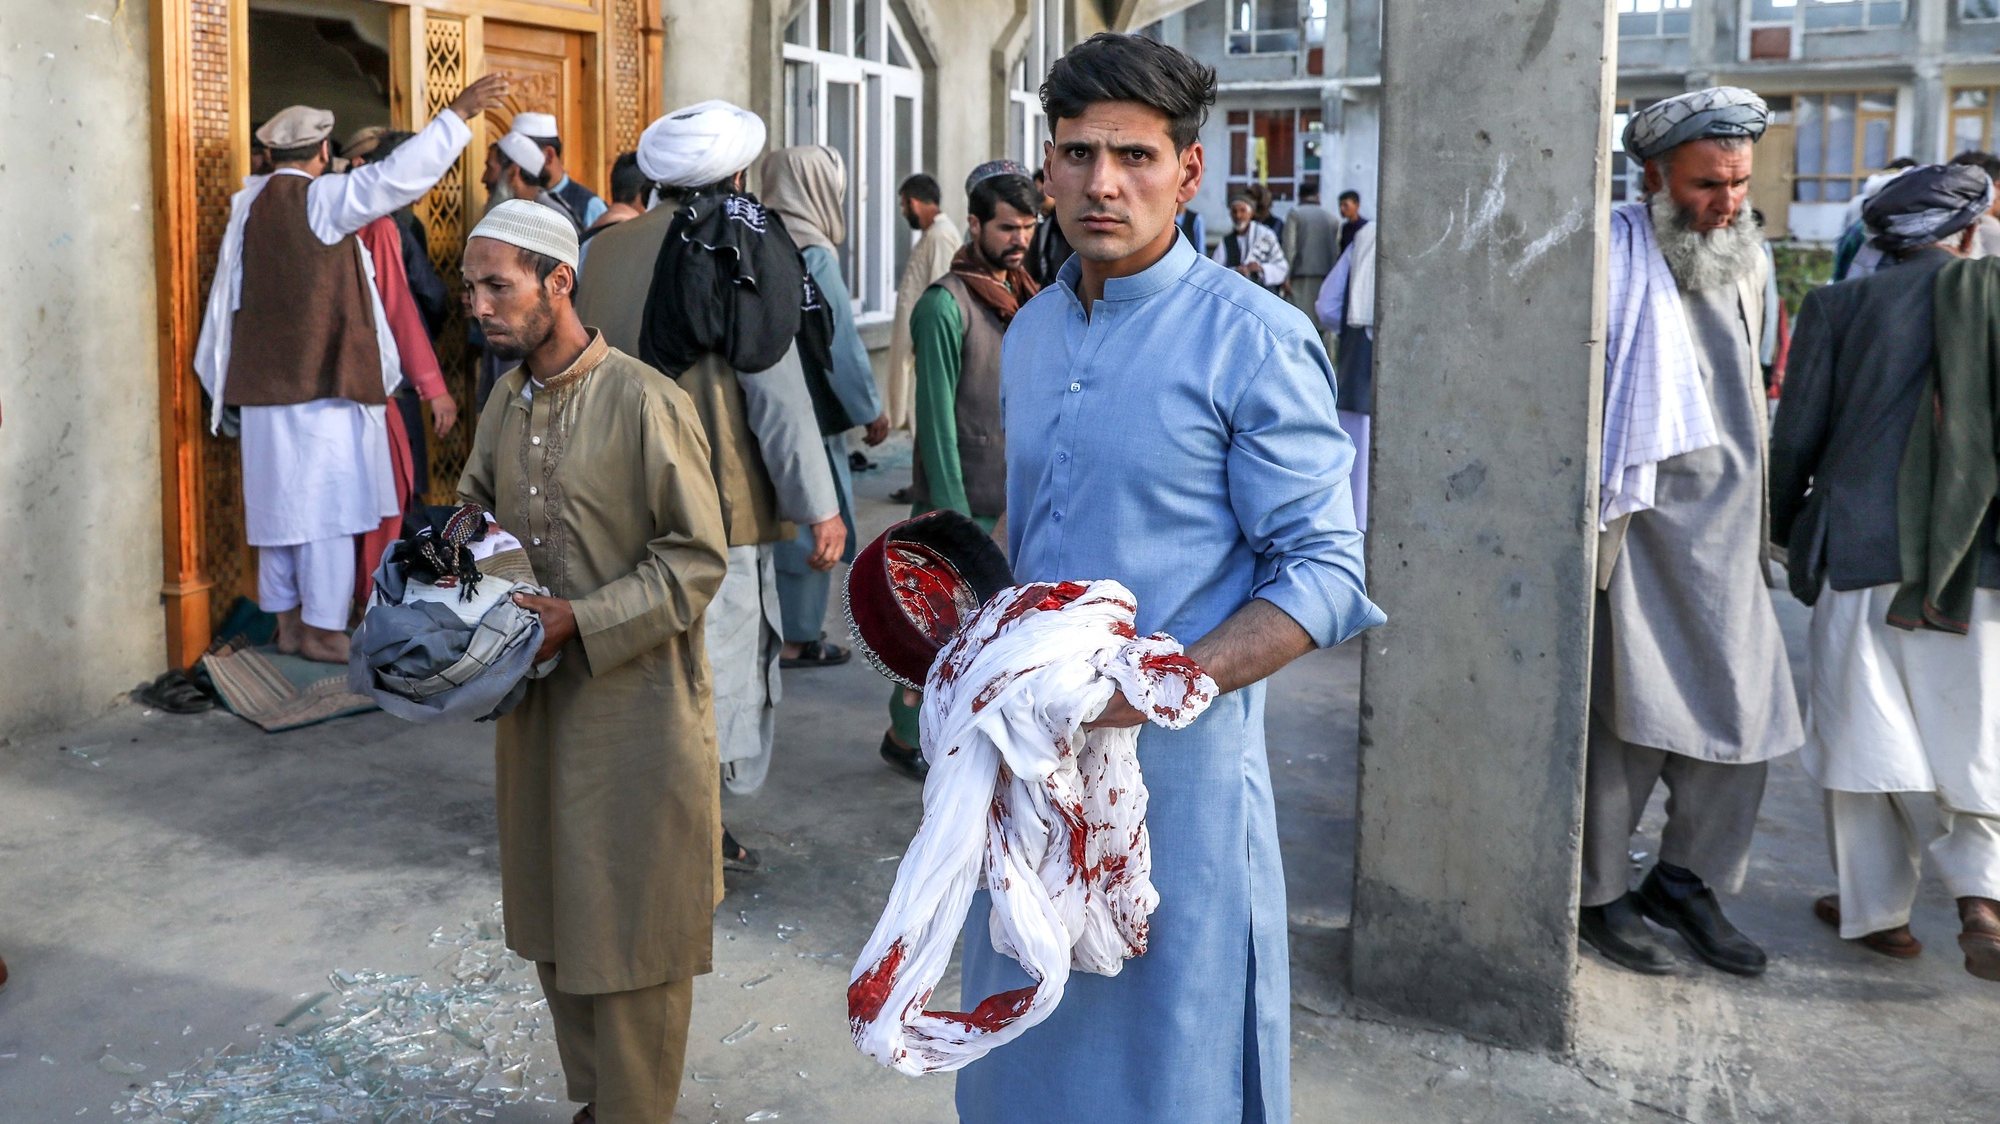 epa09199608 Afghan men hold the belongings of worshippers at the scene of an attack that targeted a mosque in the outskirt of Kabul, Afghanistan, 14 May 2021. At least 12 people were killed and 15 others wounded after a planted bomb exploded during Friday prayers inside Haji Bakhshi Mosque in Qala-e-Murad Bek area in Shakardara district of Kabul.  EPA/HEDAYATULLAH AMID